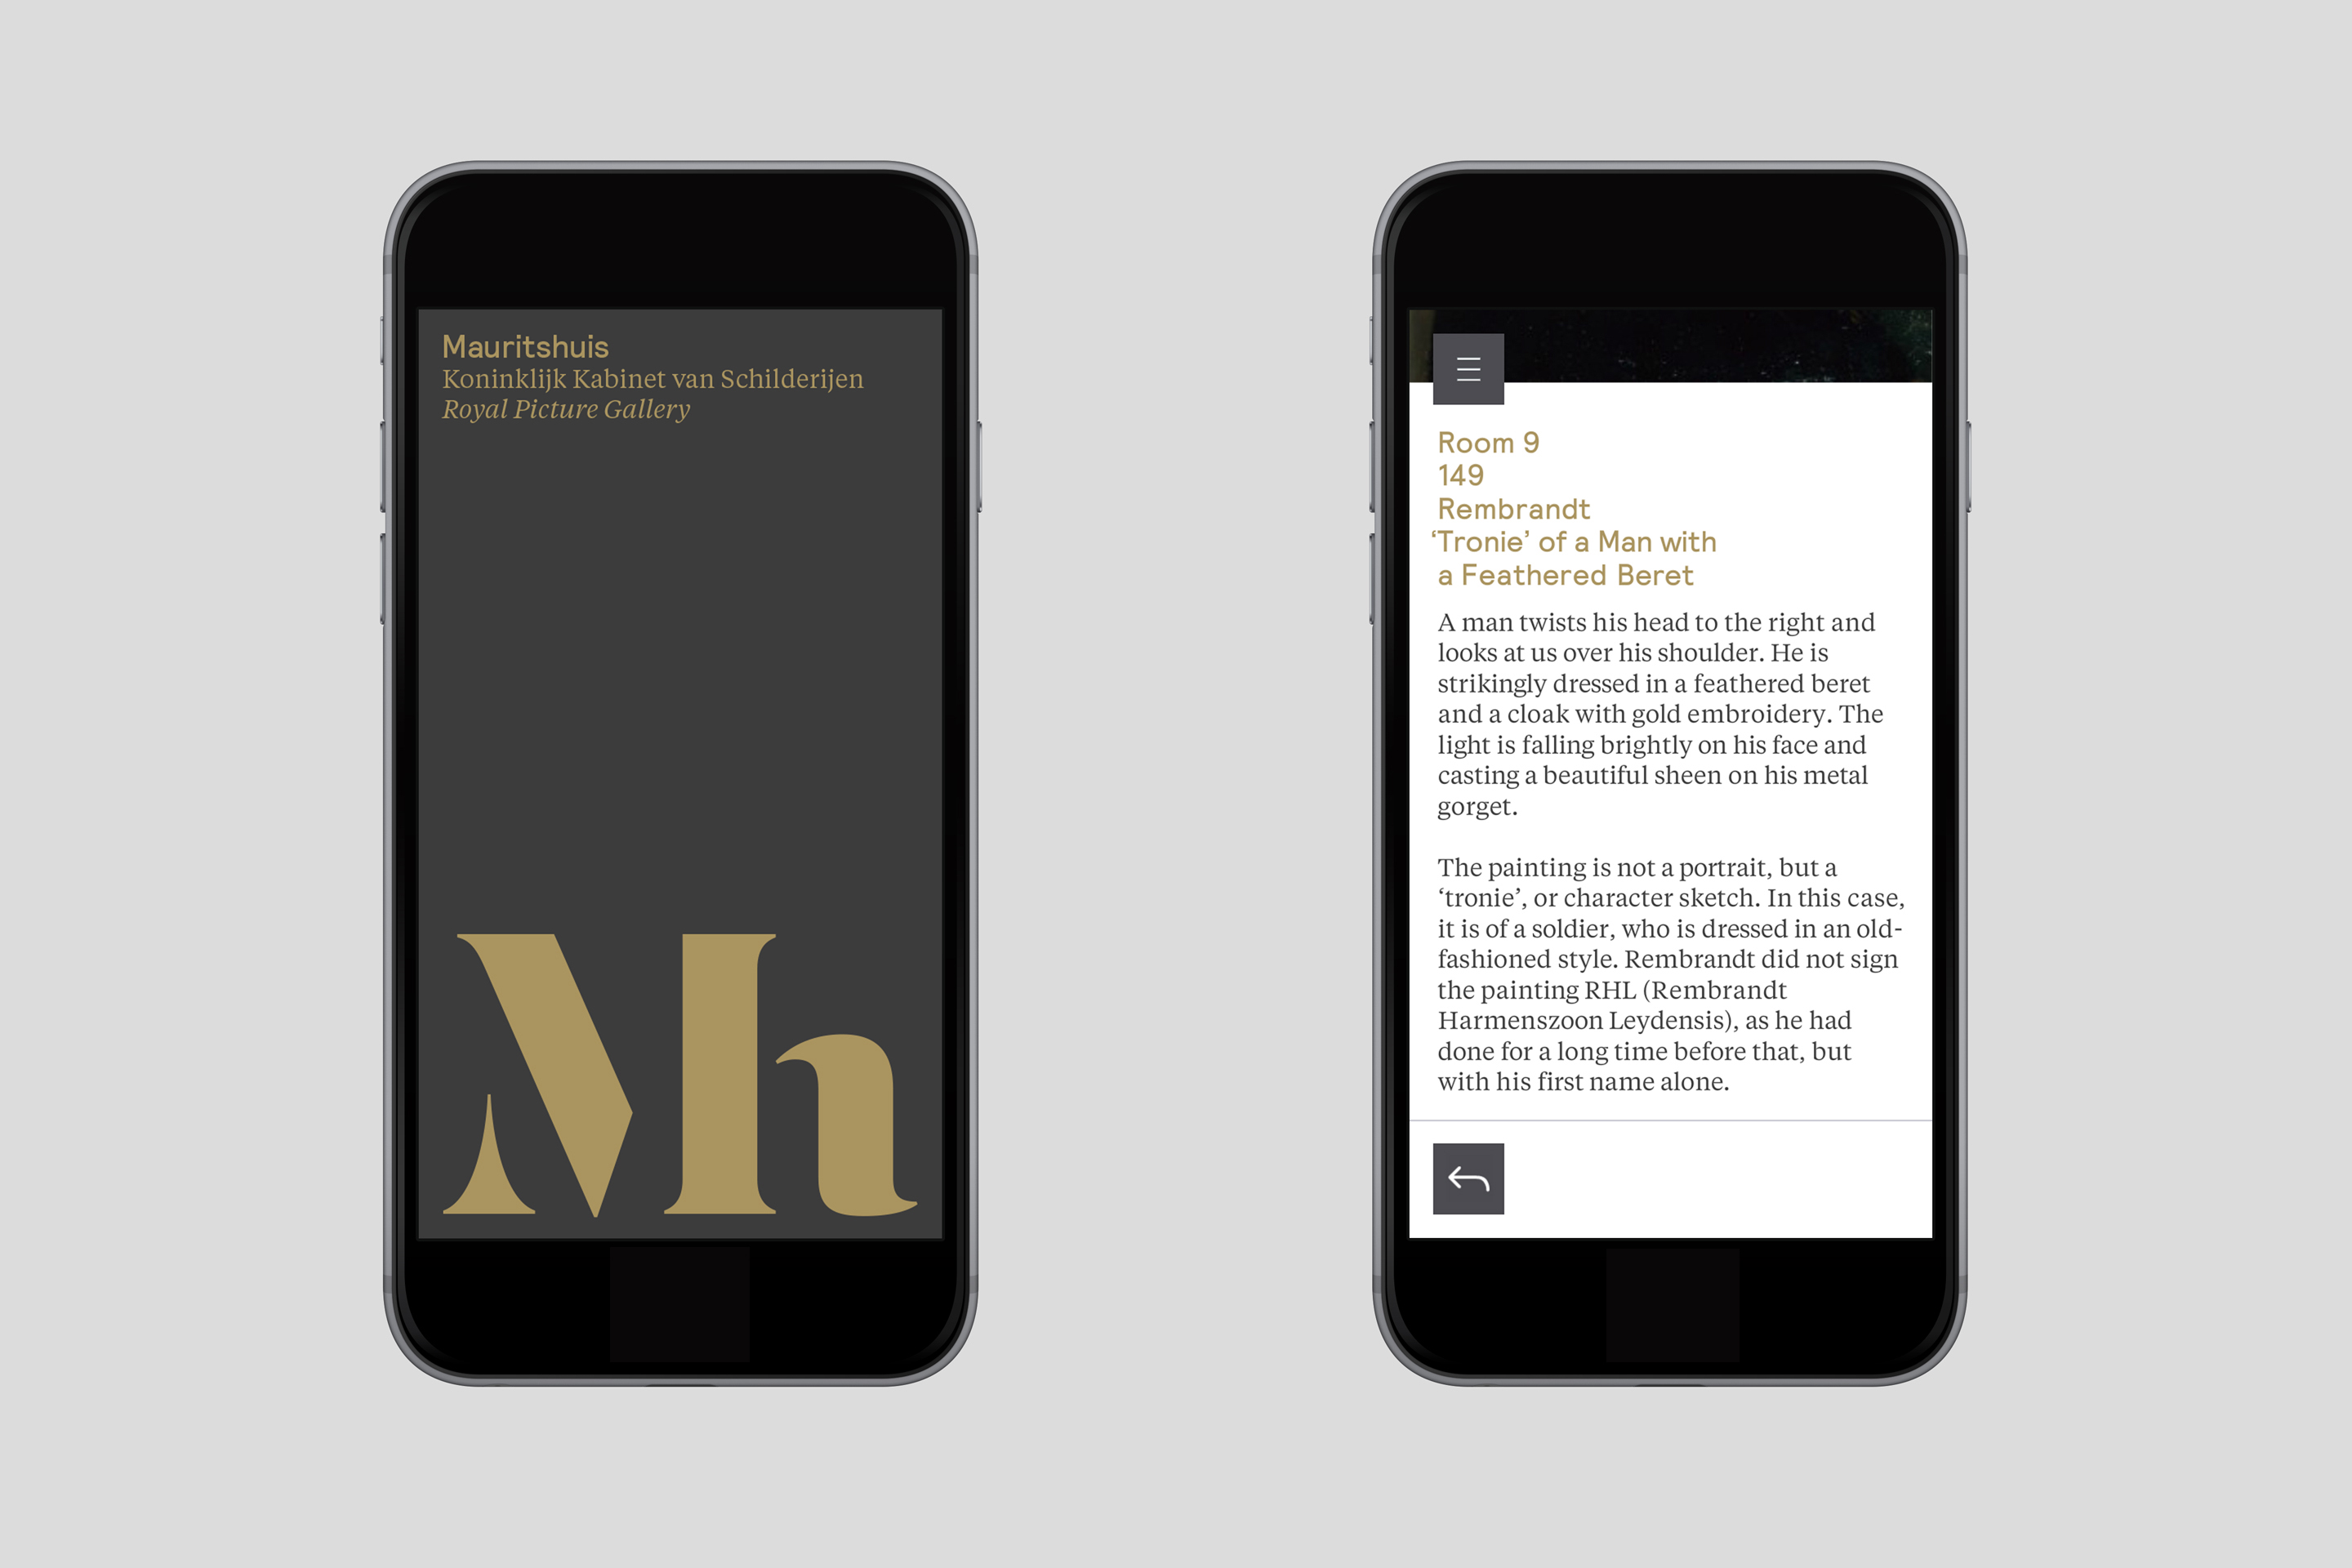 Responsive website and brand identity designed by Dumbar for Mauritshuis